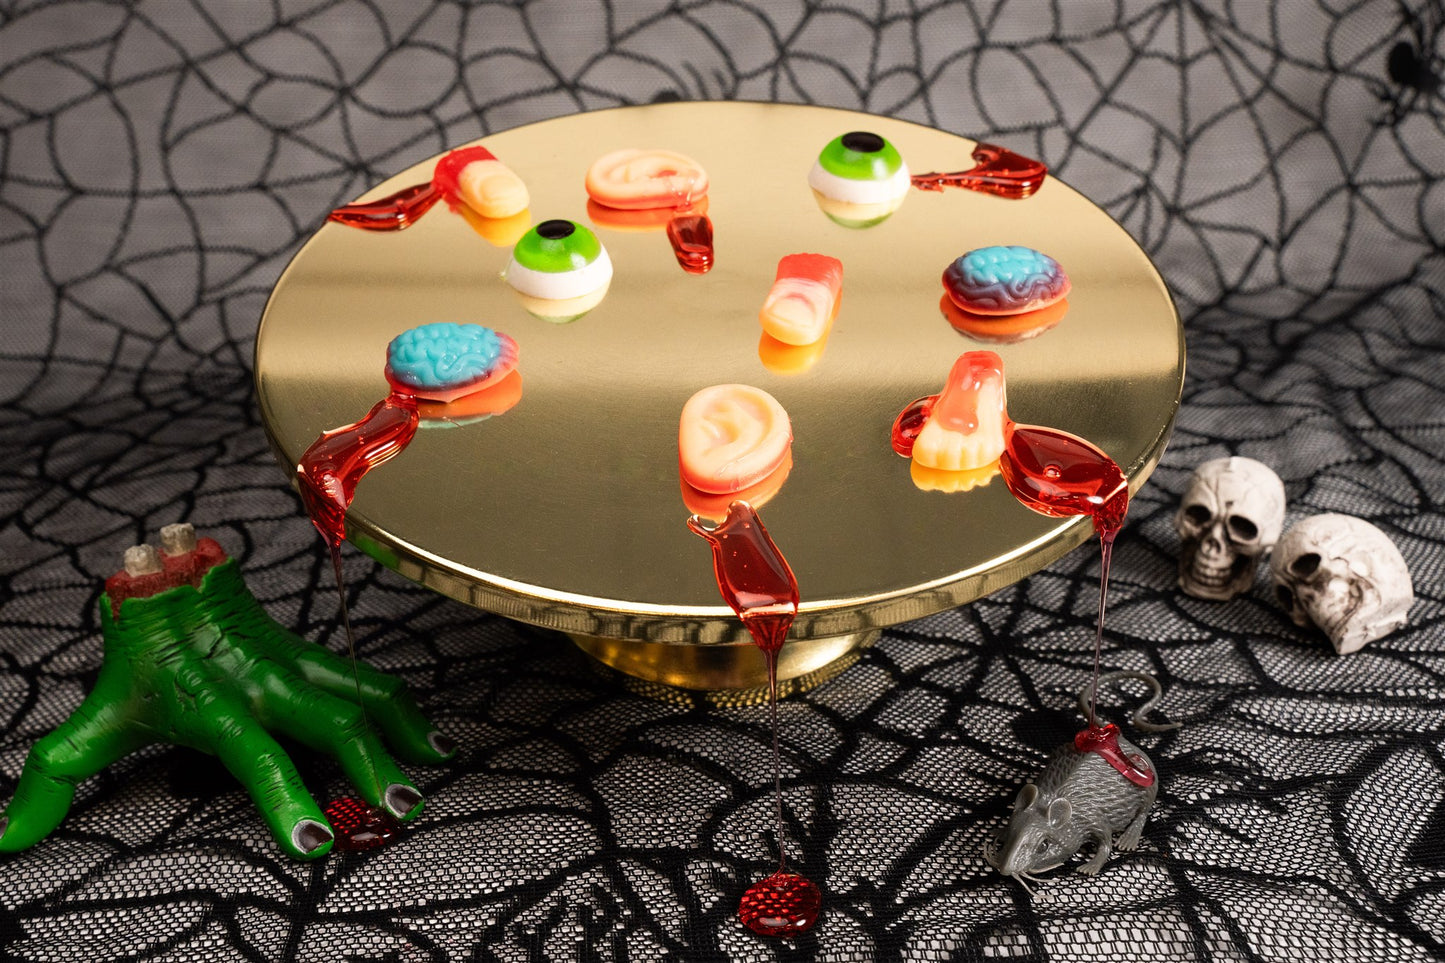 Invidual gummy body parts placed on a gold tray with fake blood decorations. 